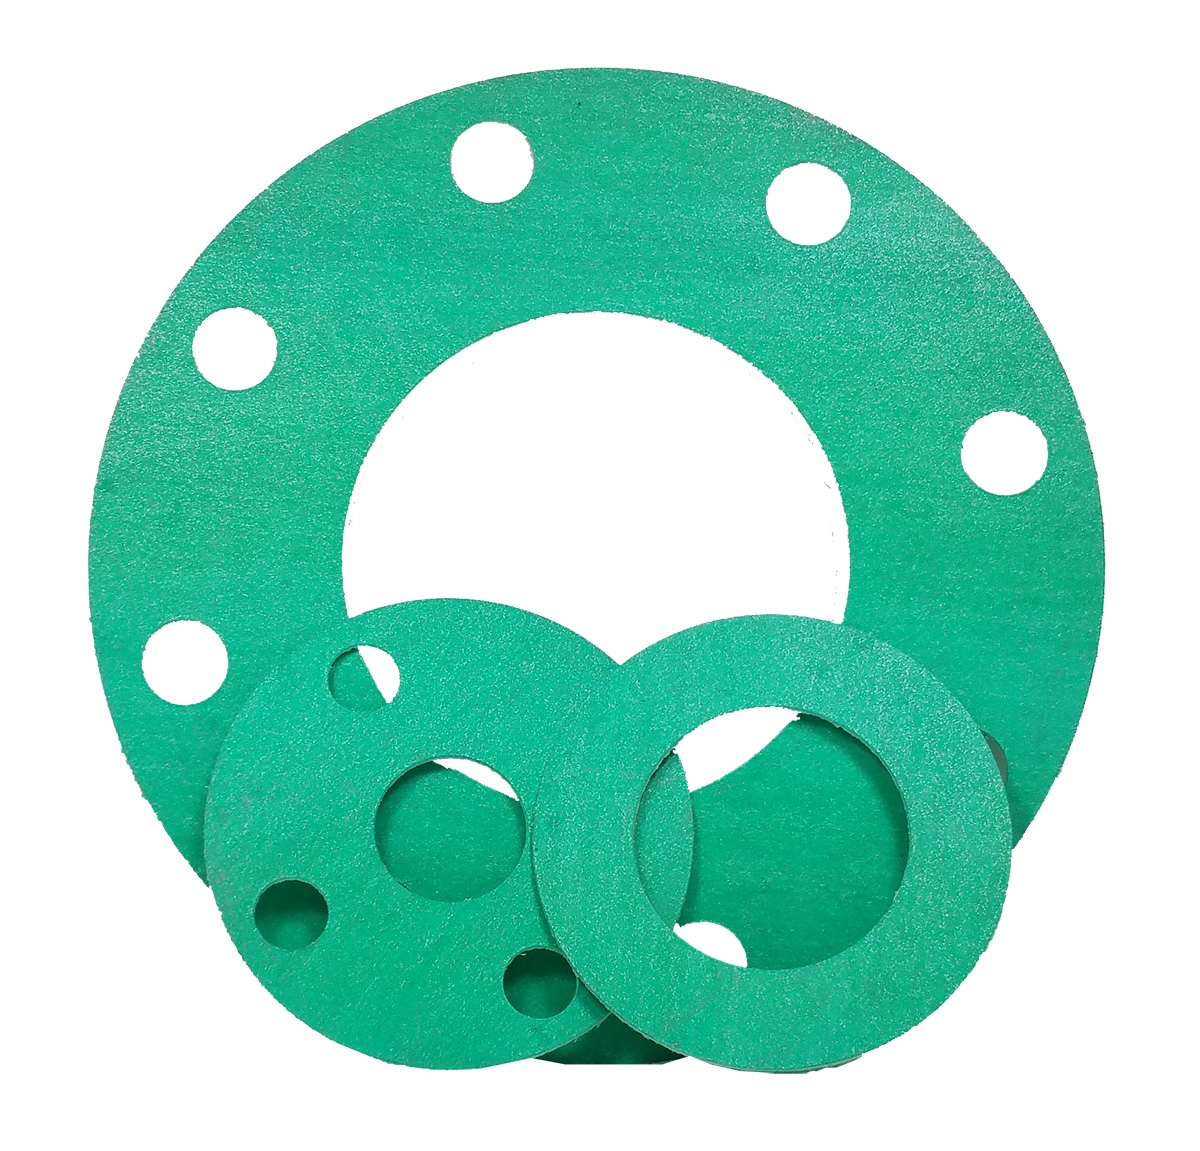 0.31 Sterling Seal CFF7001.400.031.150X50 7001 Compressed Non-Asbestos Green/Blue/White Pressure Class 150# Aramid/NBR Full Face Gasket 4 Pipe Size Pack of 50 1/32 Thick